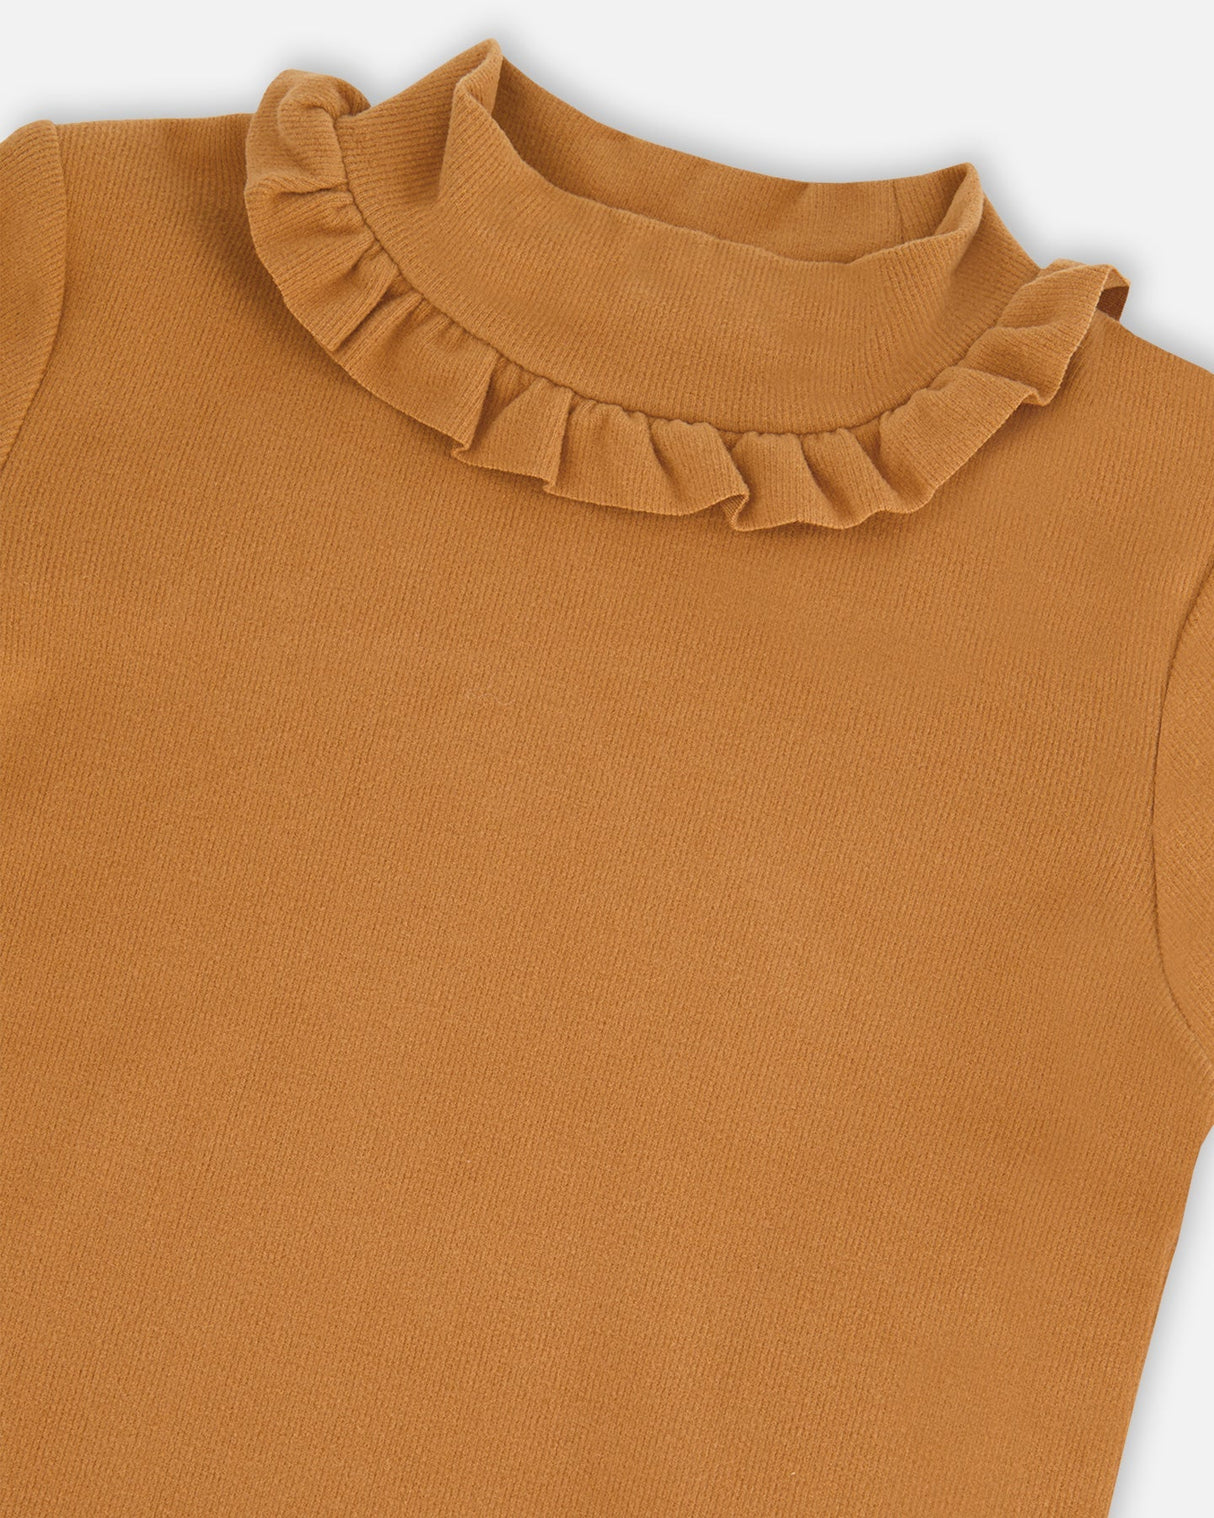 Super Soft Brushed Rib Mock Neck Top With Frills Golden Yellow-3